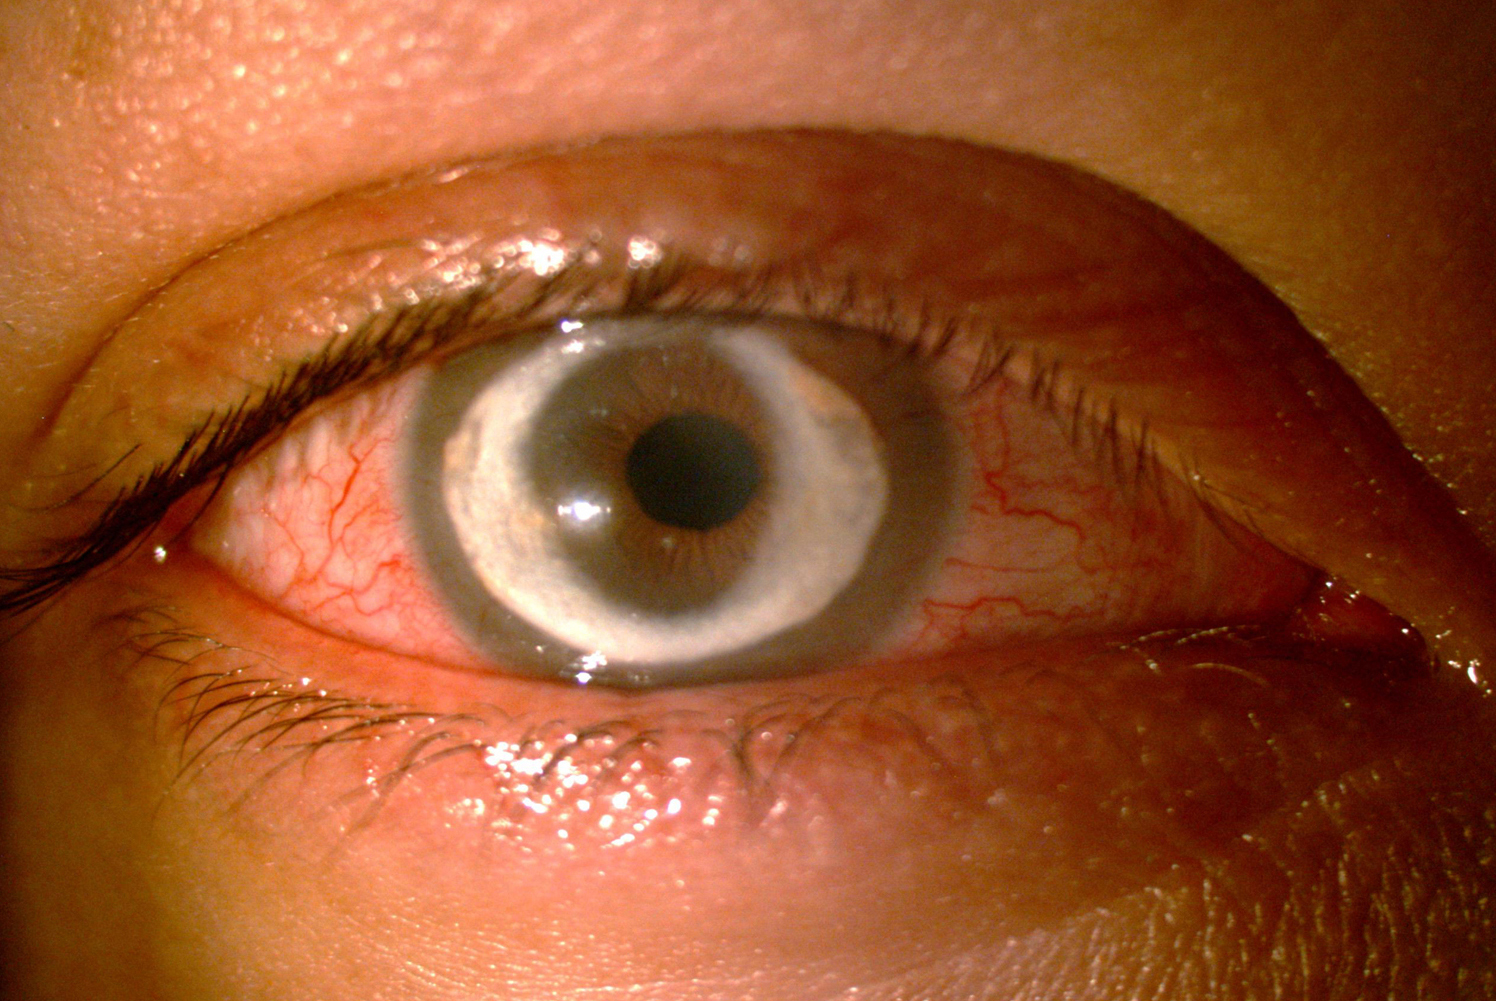 Slit lamp photograph showing inflammation and crystalline deposits on the corneal stroma.